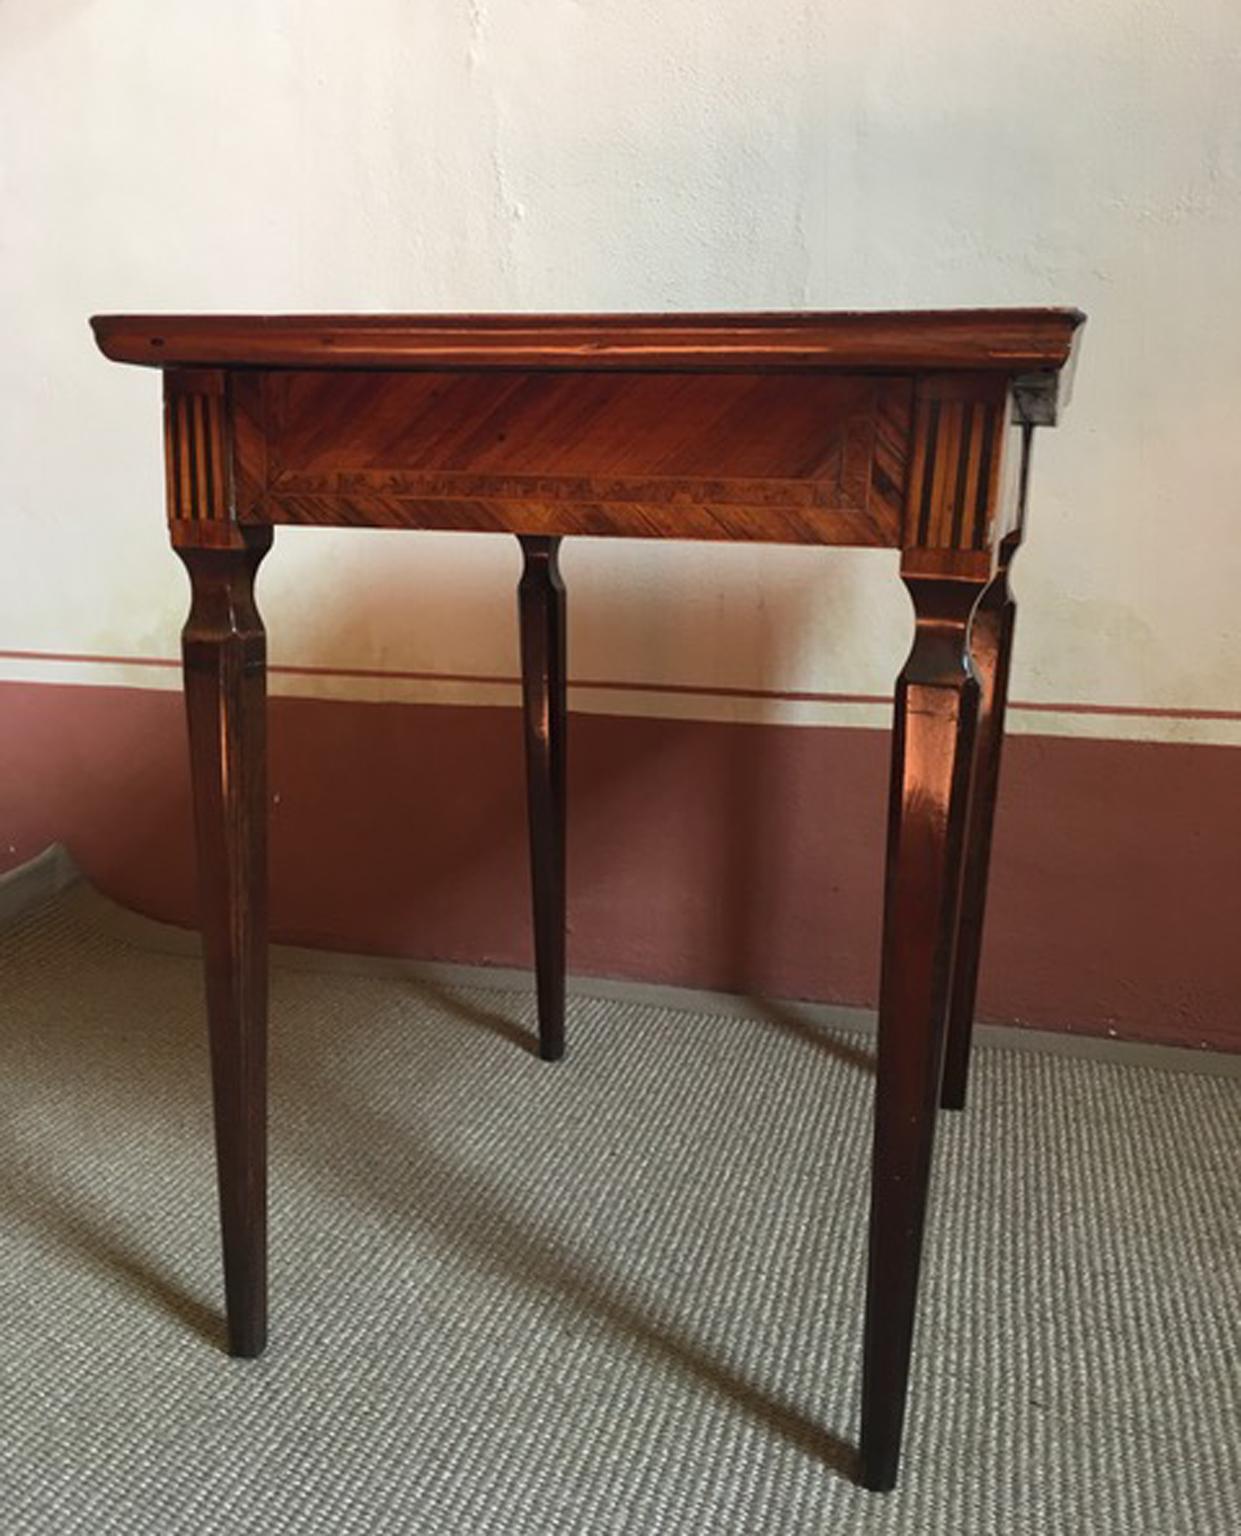 This is a very elegant and proportioned bedside table, handcrafted in Italy, Tuscany, in 1750 circa. Very well preserved.

With certificate of autheticity.